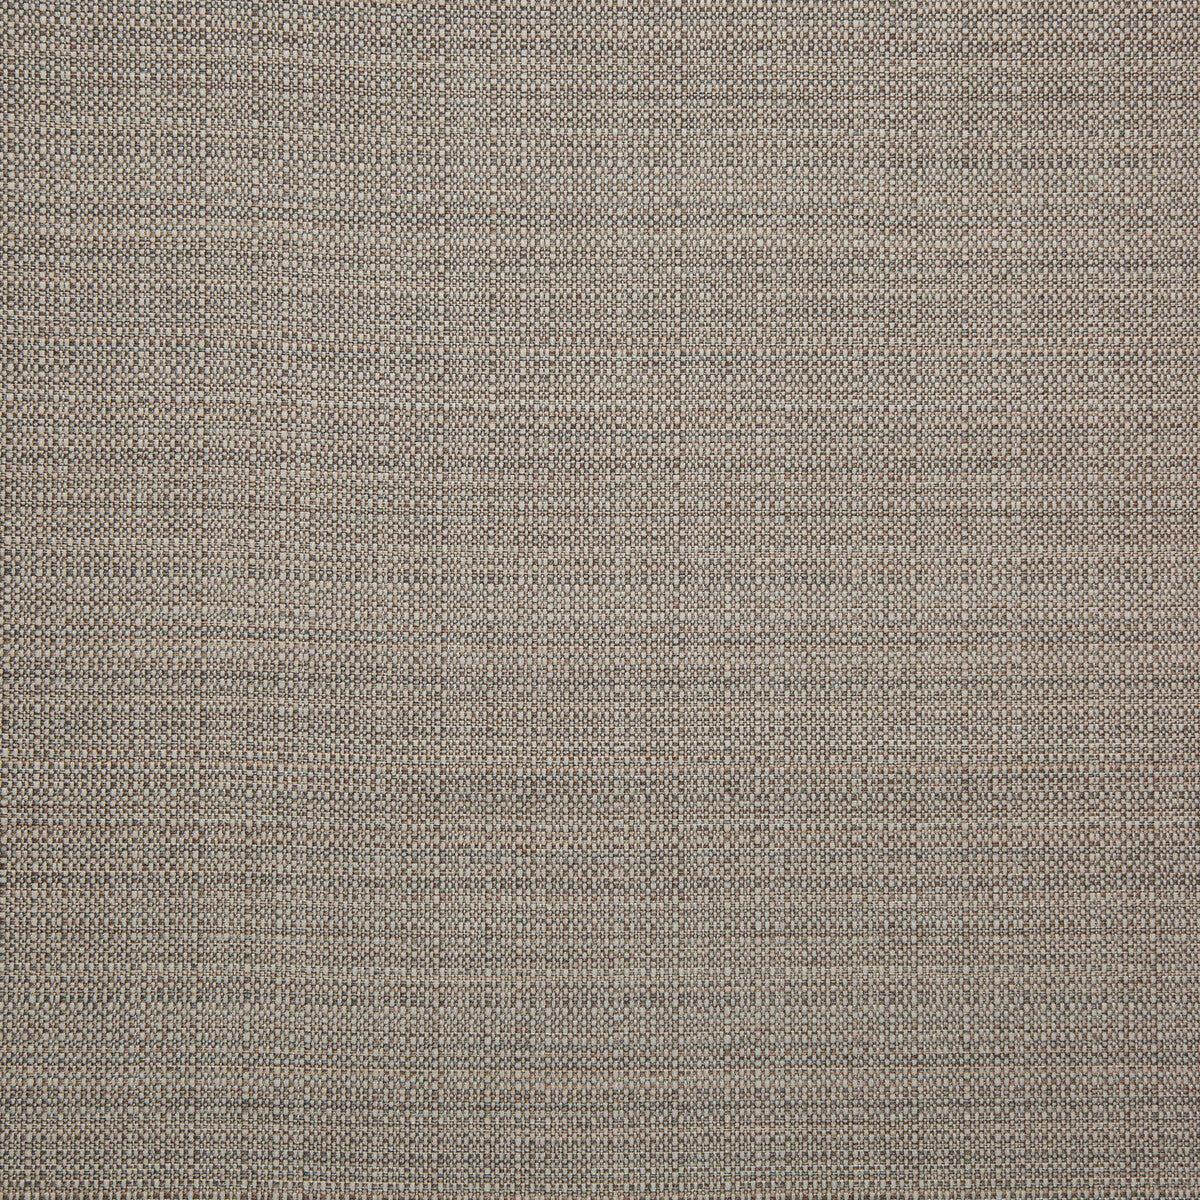 Arroyo fabric in stone color - pattern 35823.11.0 - by Kravet Design in the Indoor / Outdoor collection